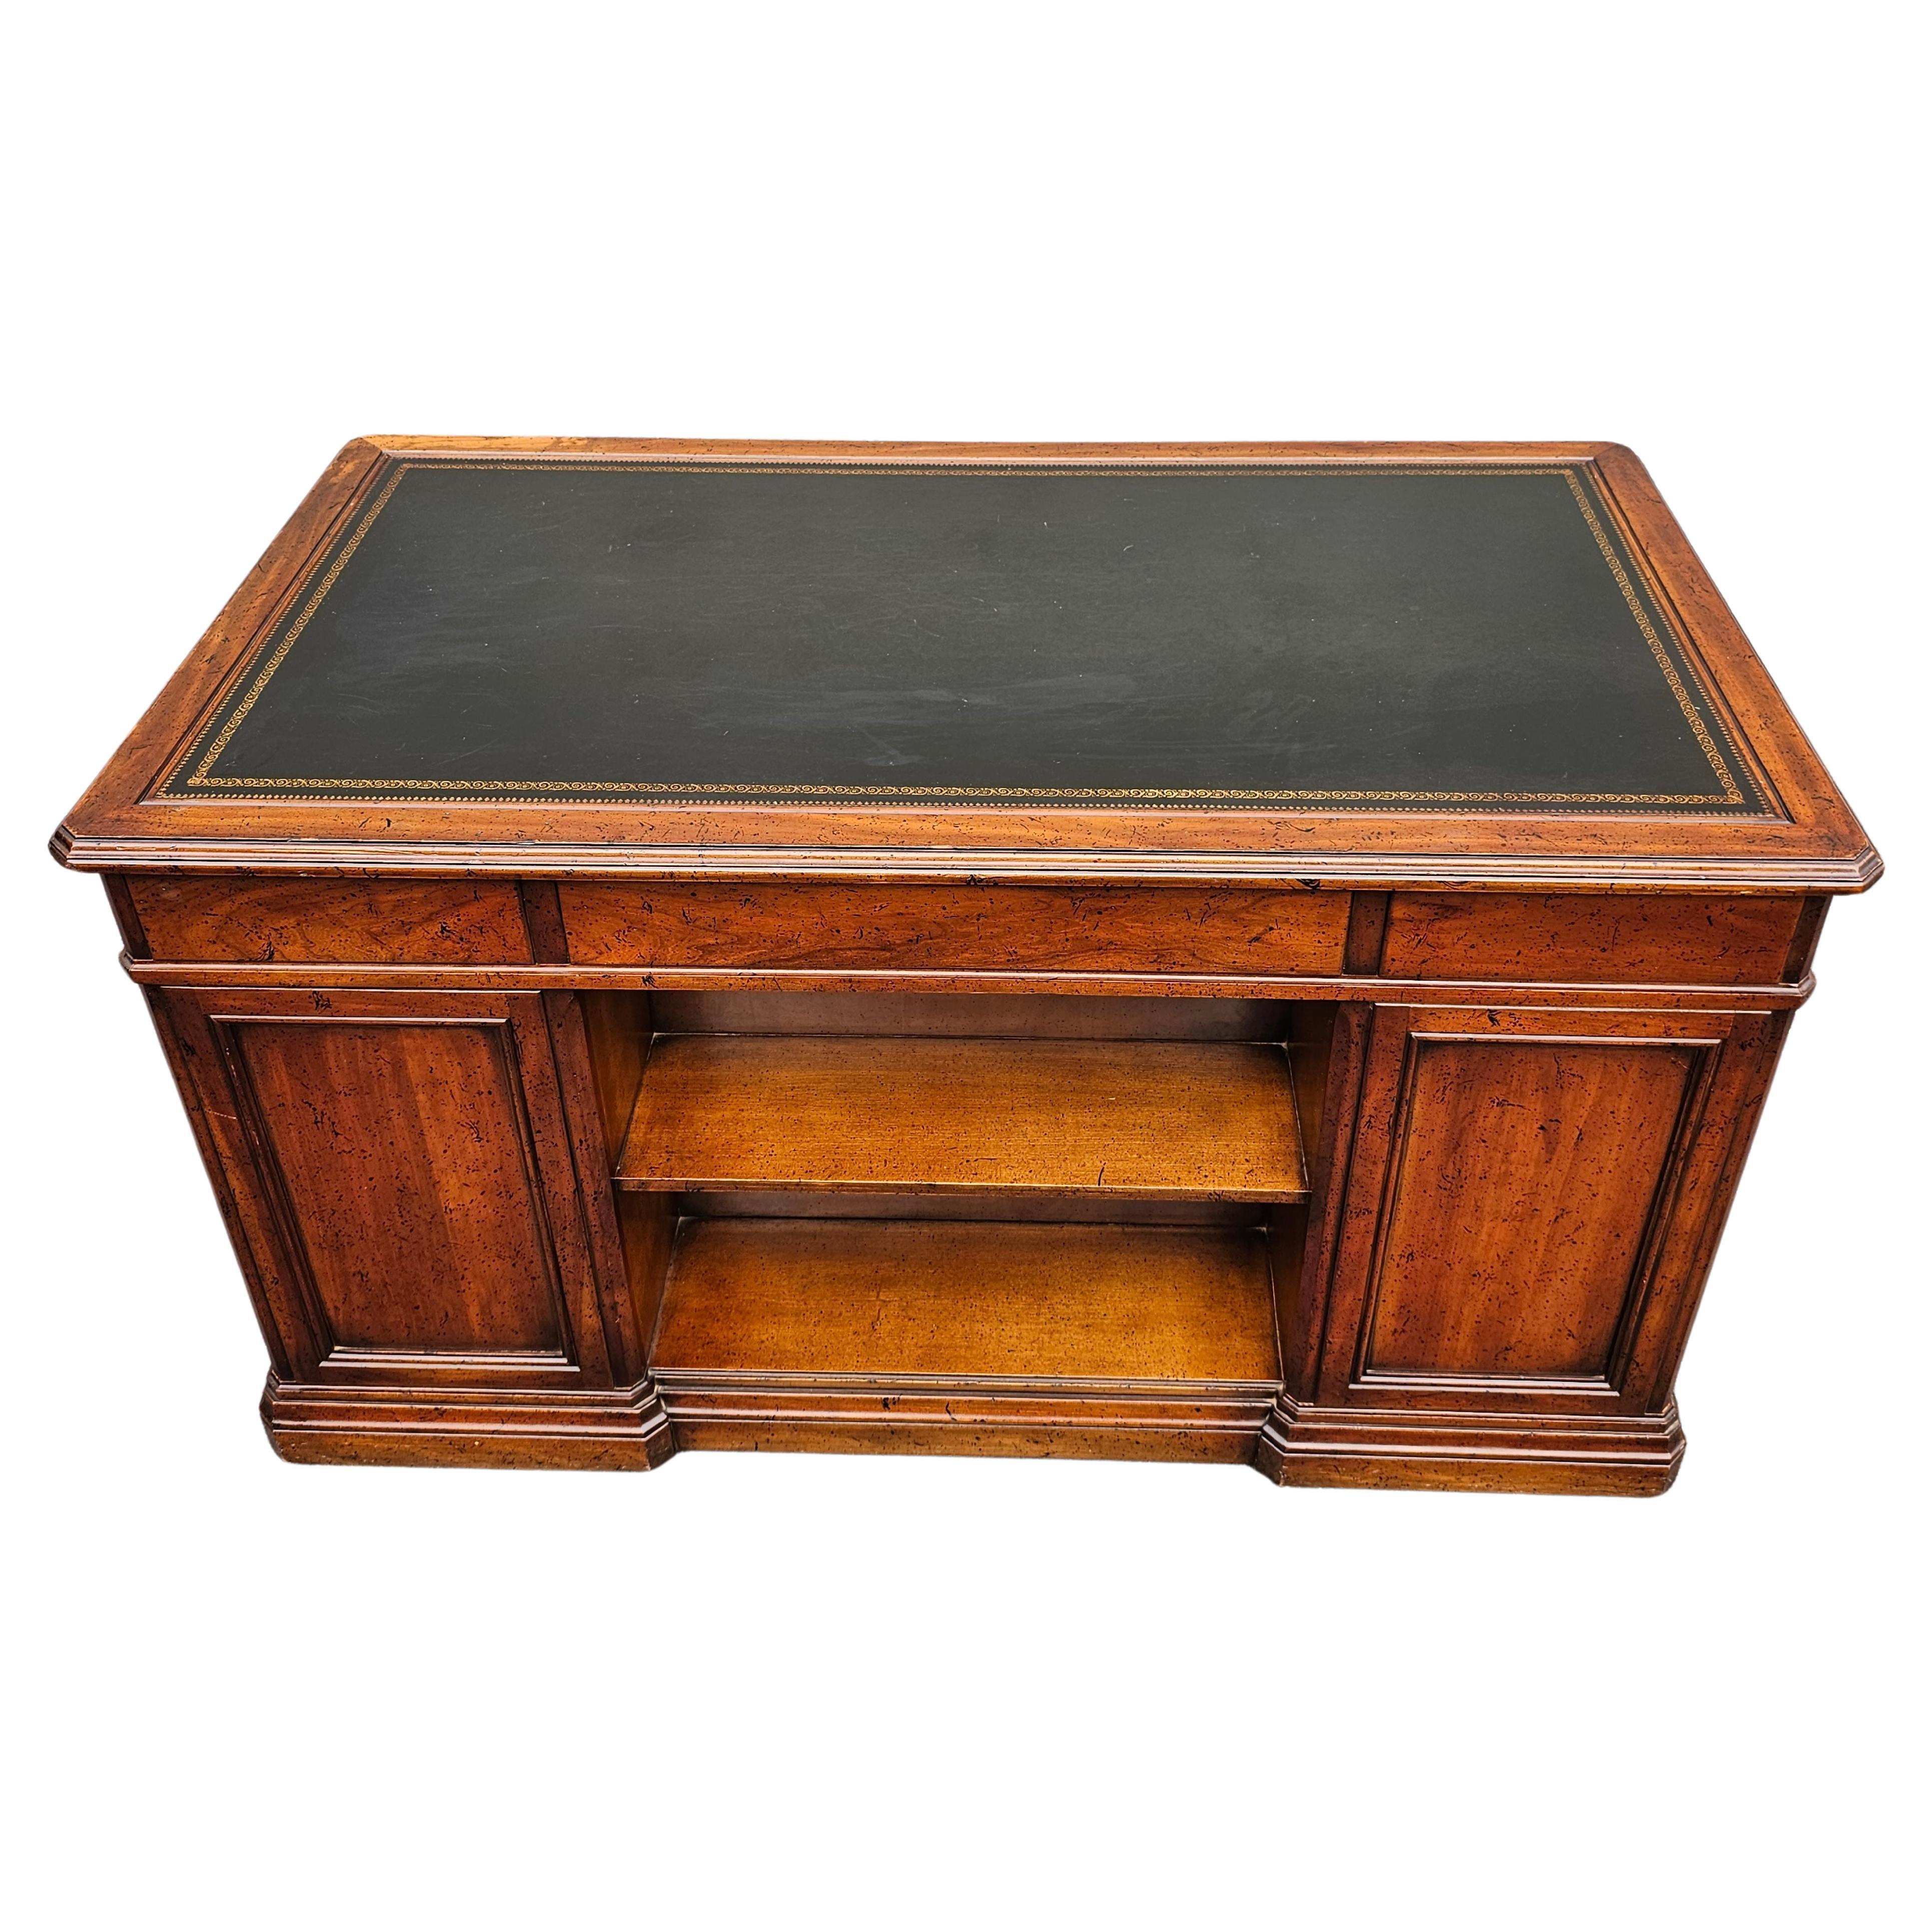 A beautiful rare Sligh Lowry Furniture Distressed Walnut and Black Tooled Letaher Top Excutive Desk Bookcase in good vintage condition. Gold stincile ornate leather top
Measures 54